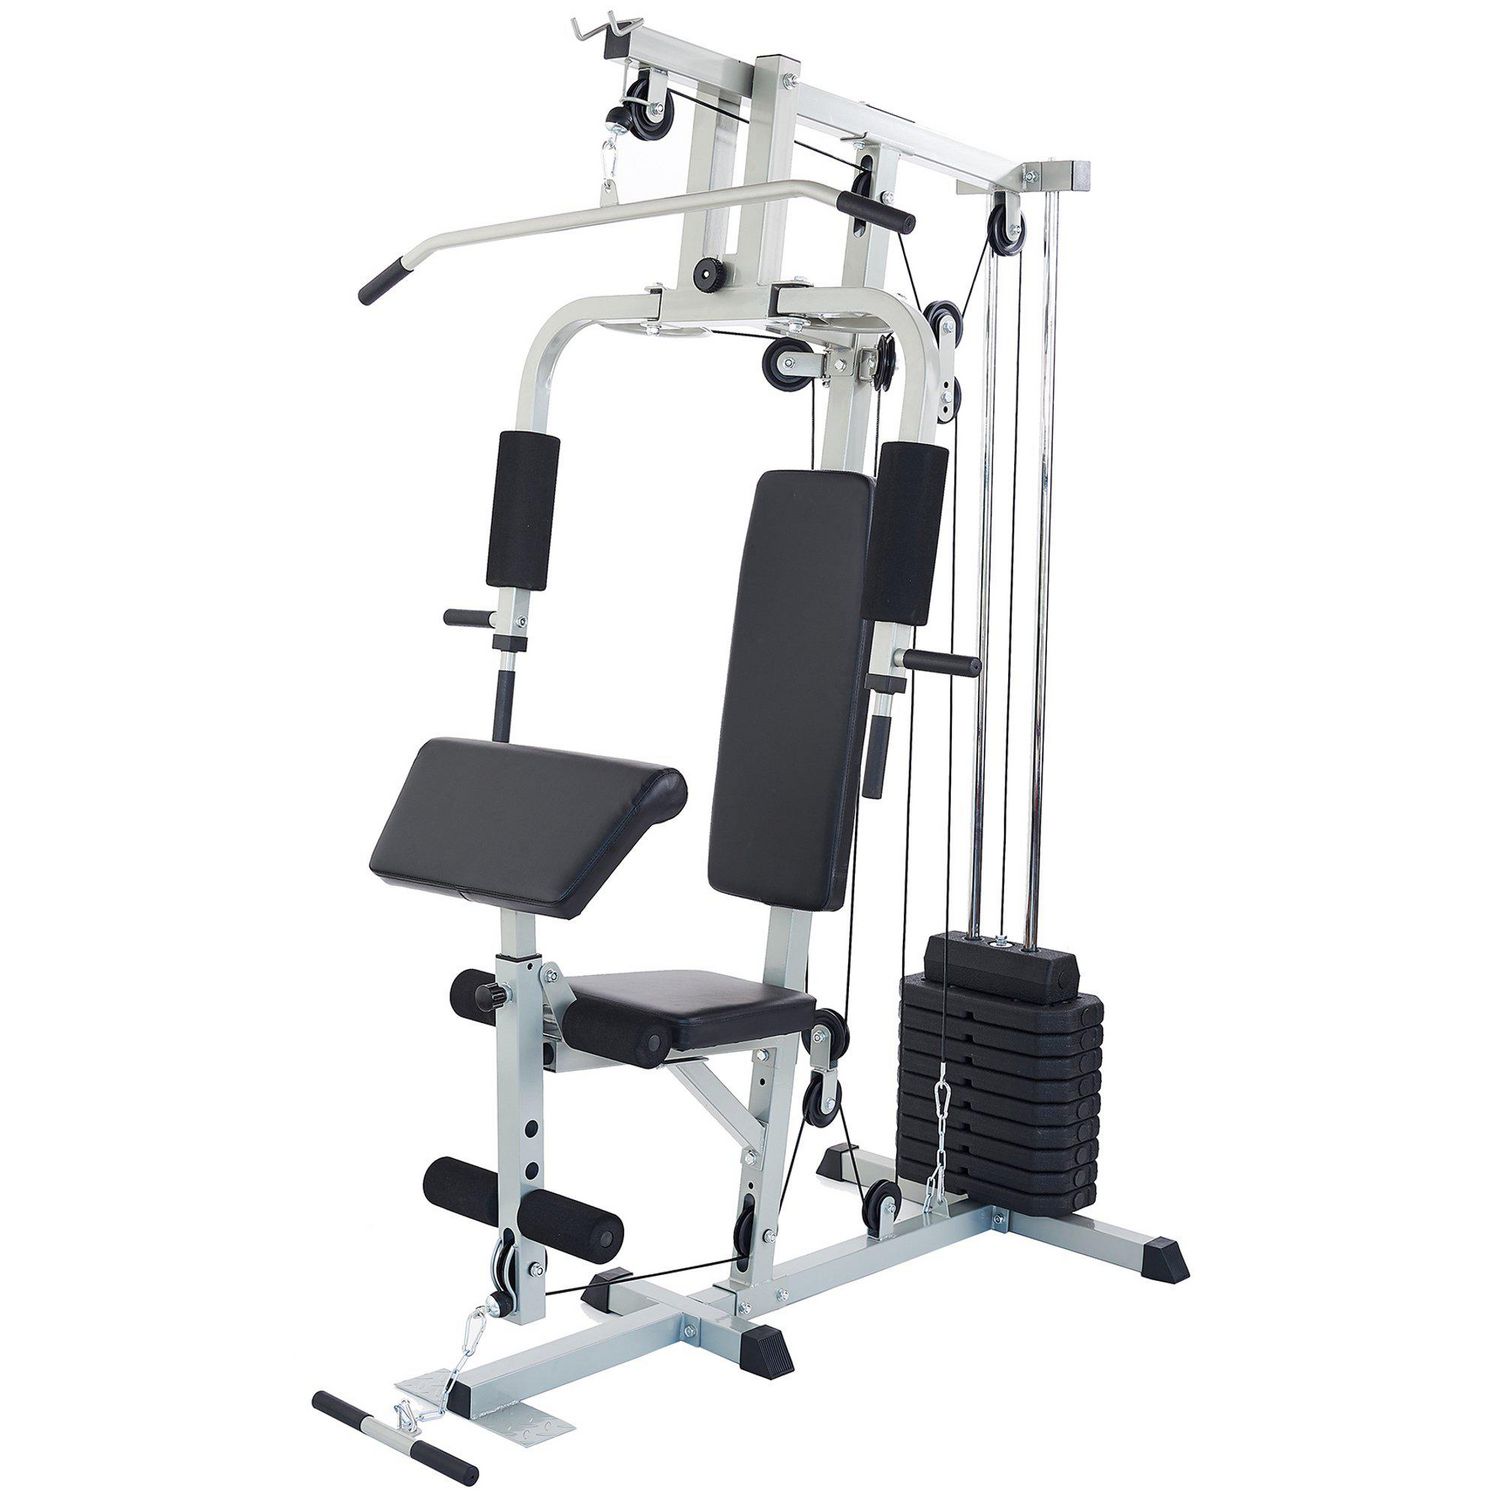 Everyday Essentials RS 80 Home Gym System Workout Station with